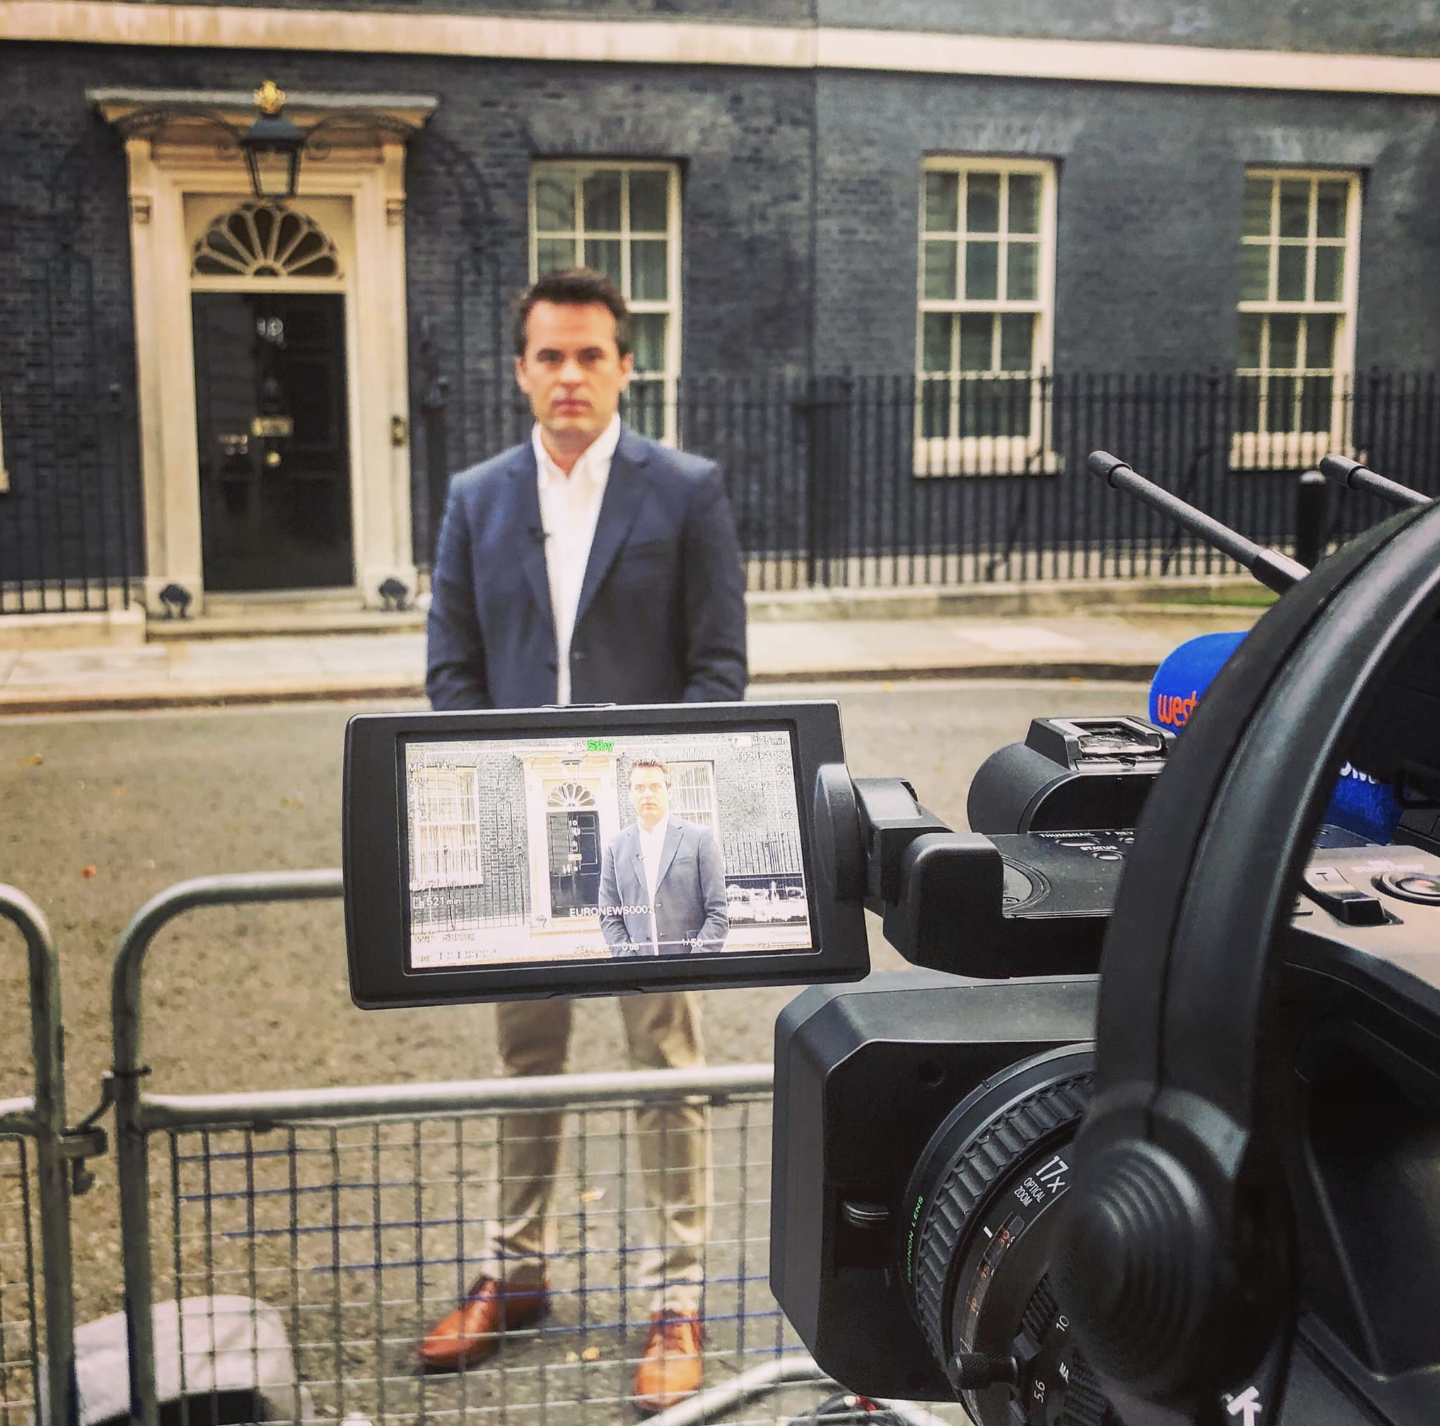 Broadcasting from 10 Downing Street.